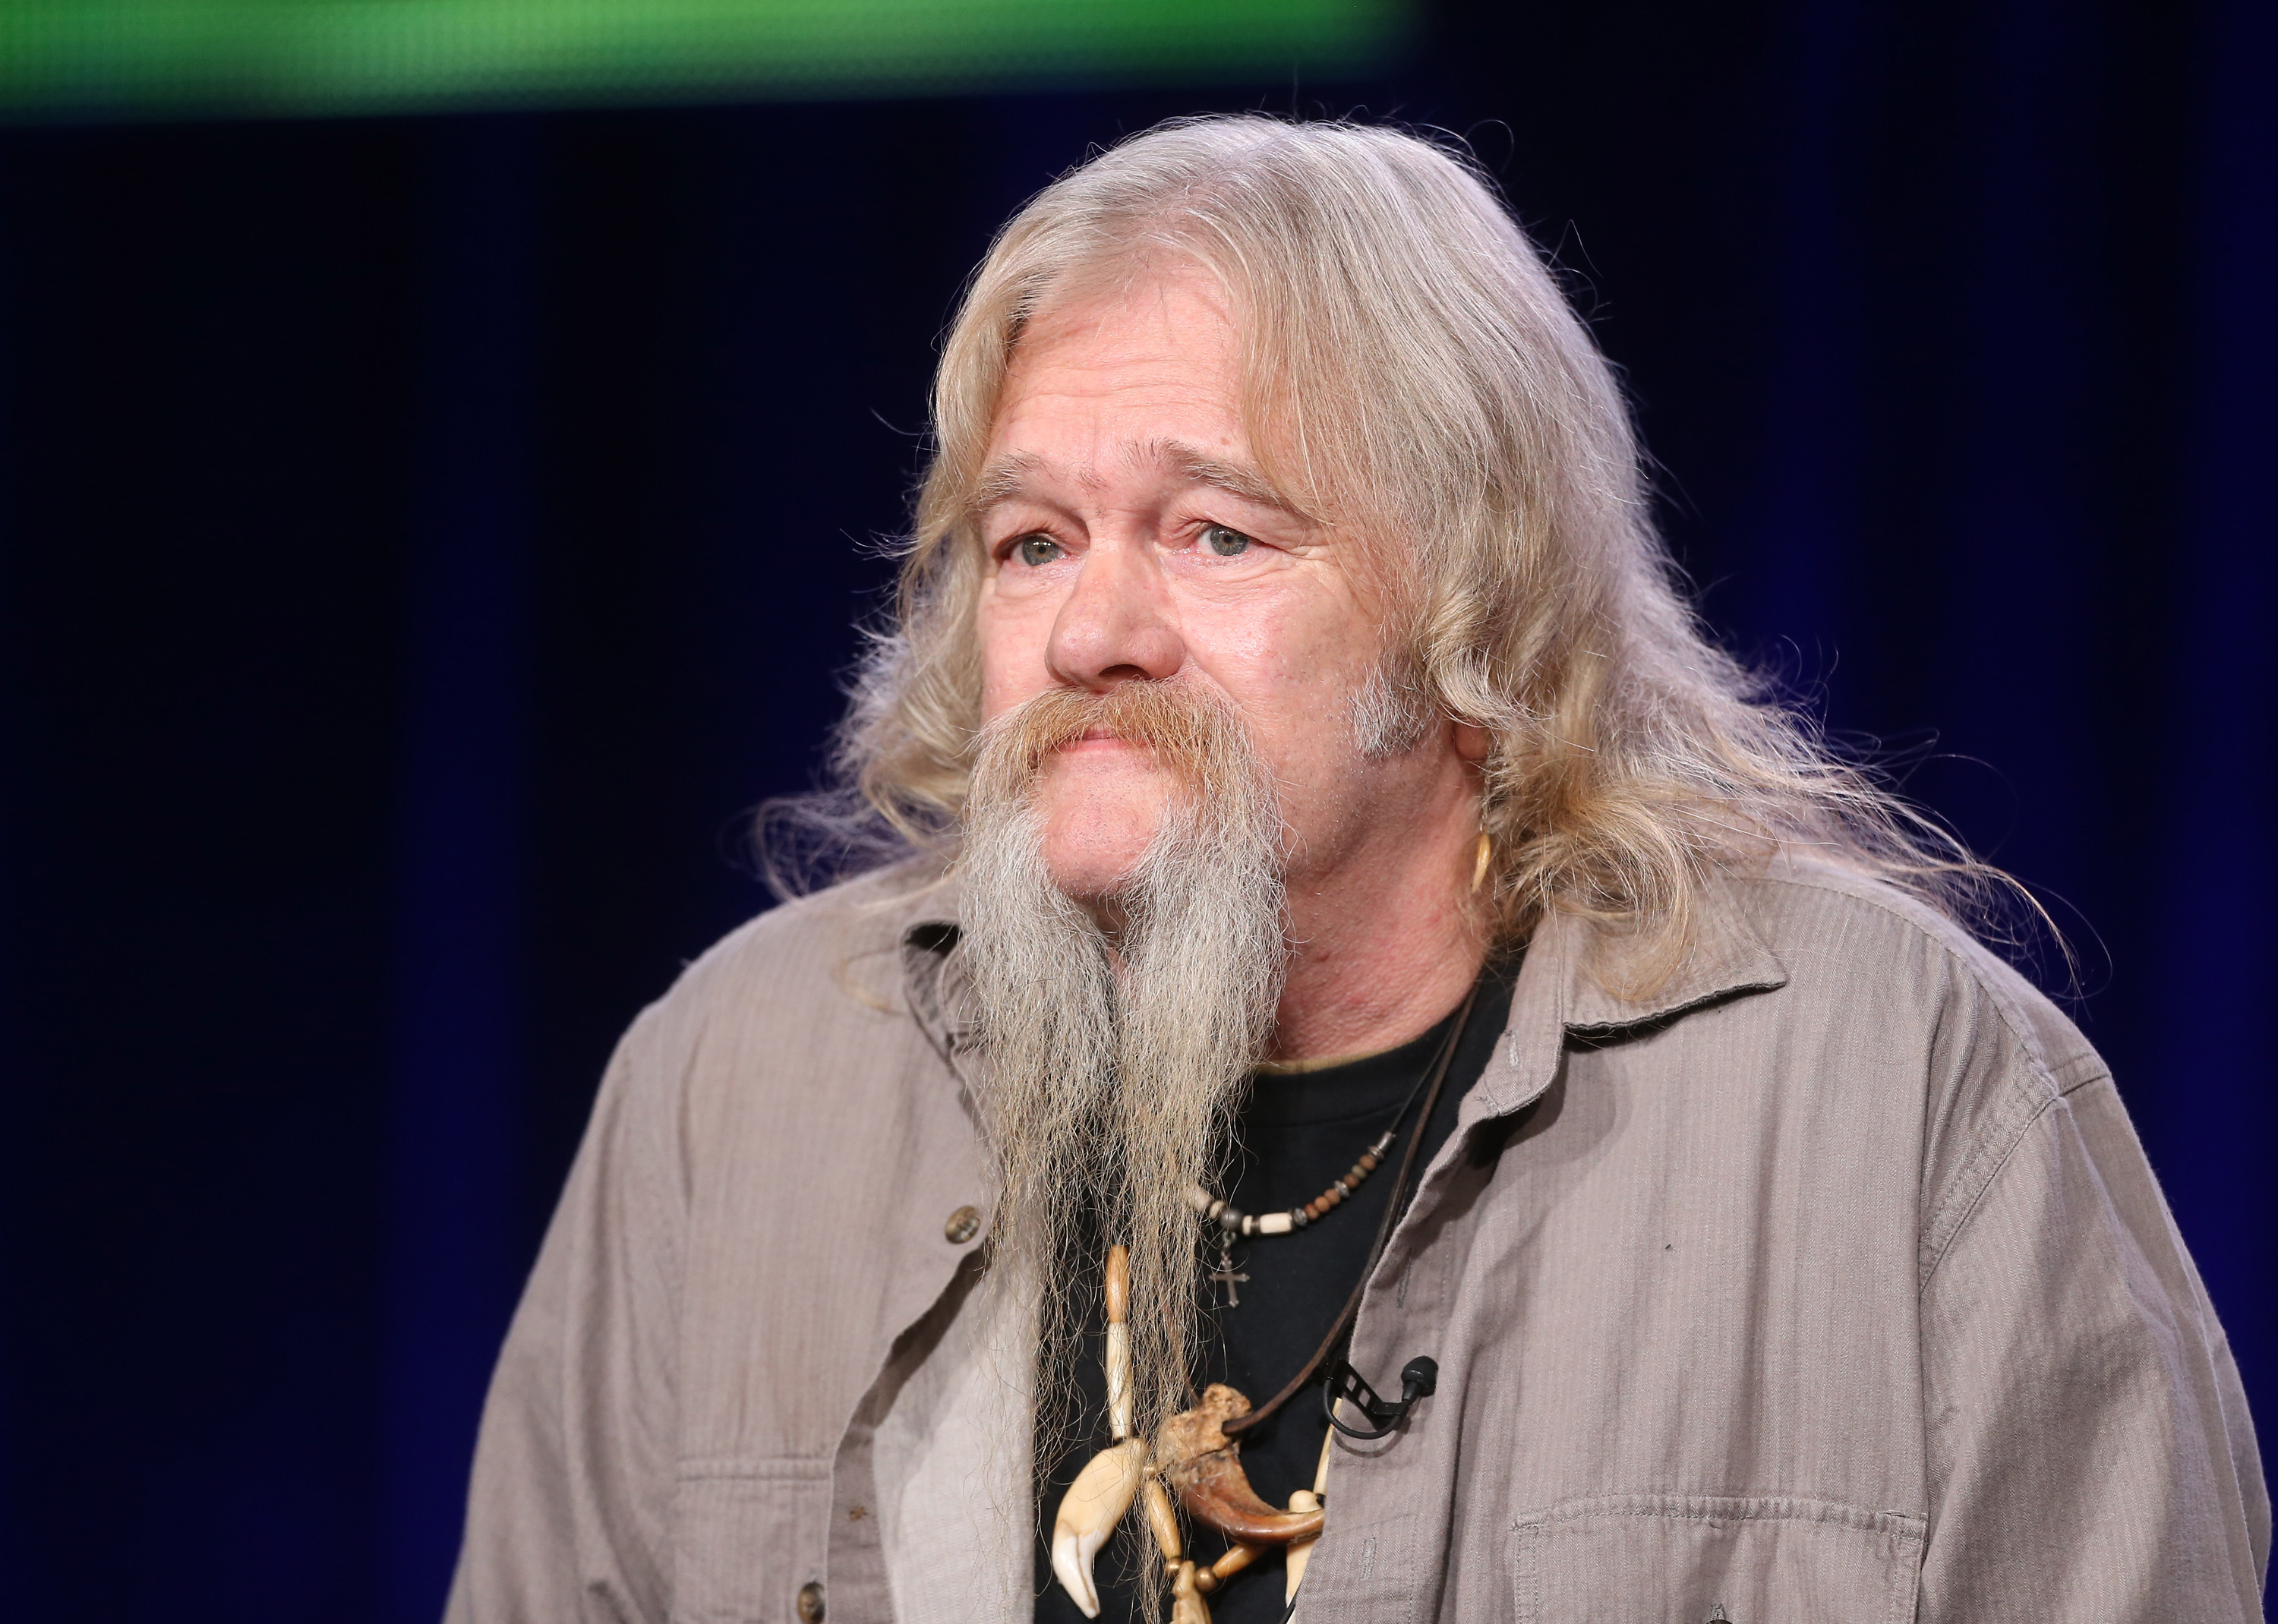 Bill Brown of Alaskan Bush People onstage at the 2014 TCA tour